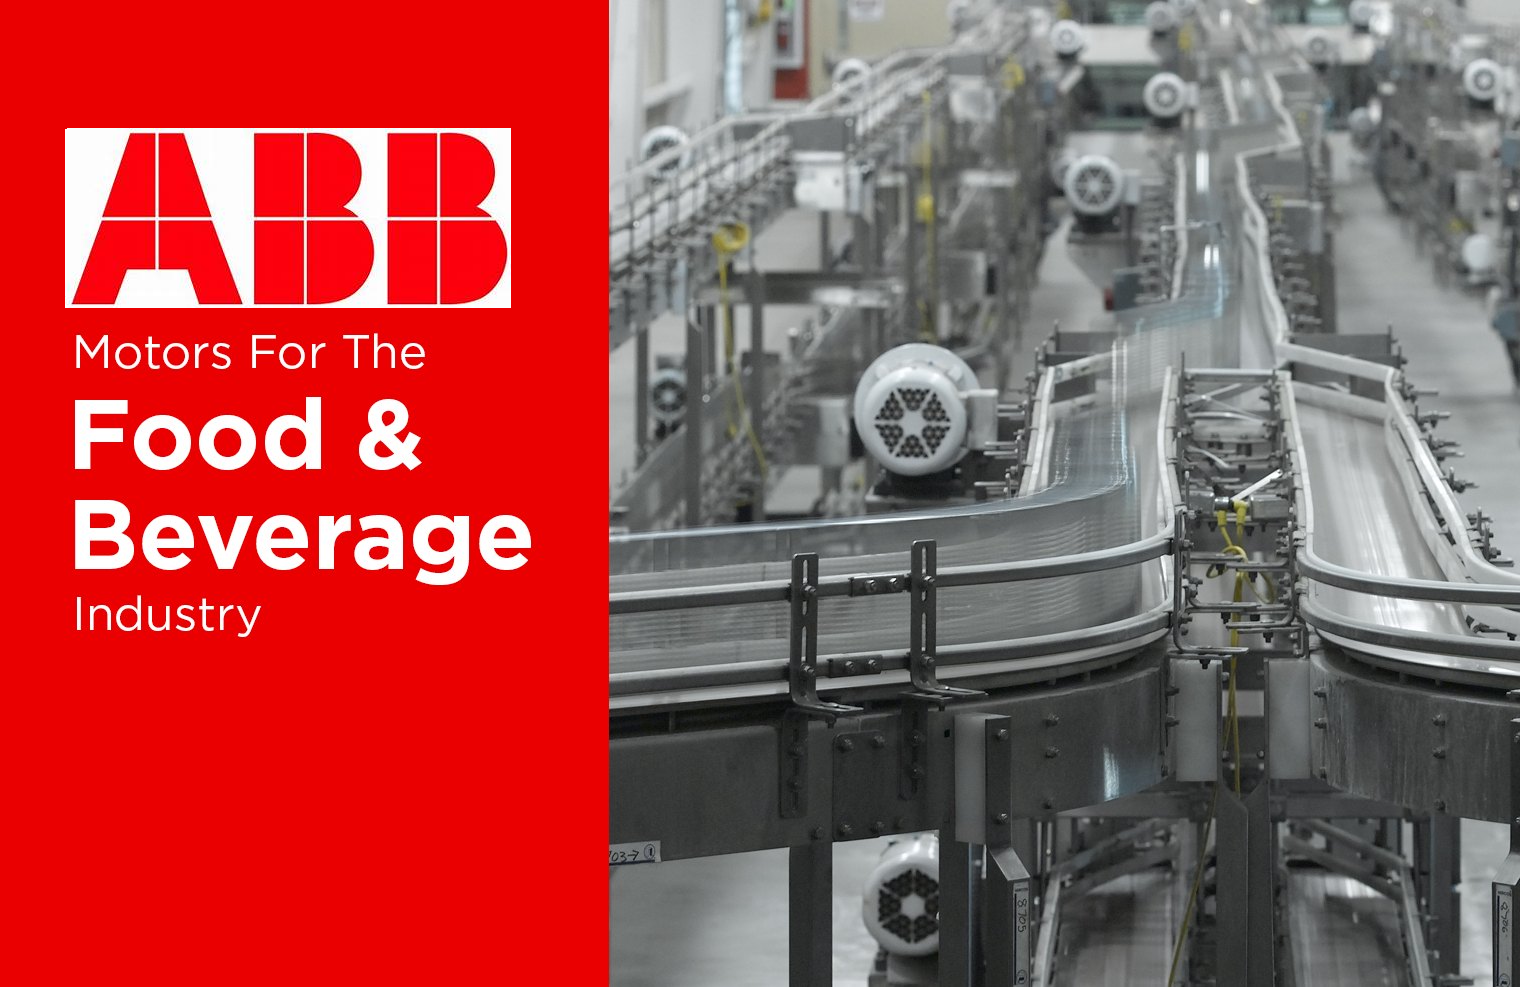 ABB Motors for the Food & Beverage Industry